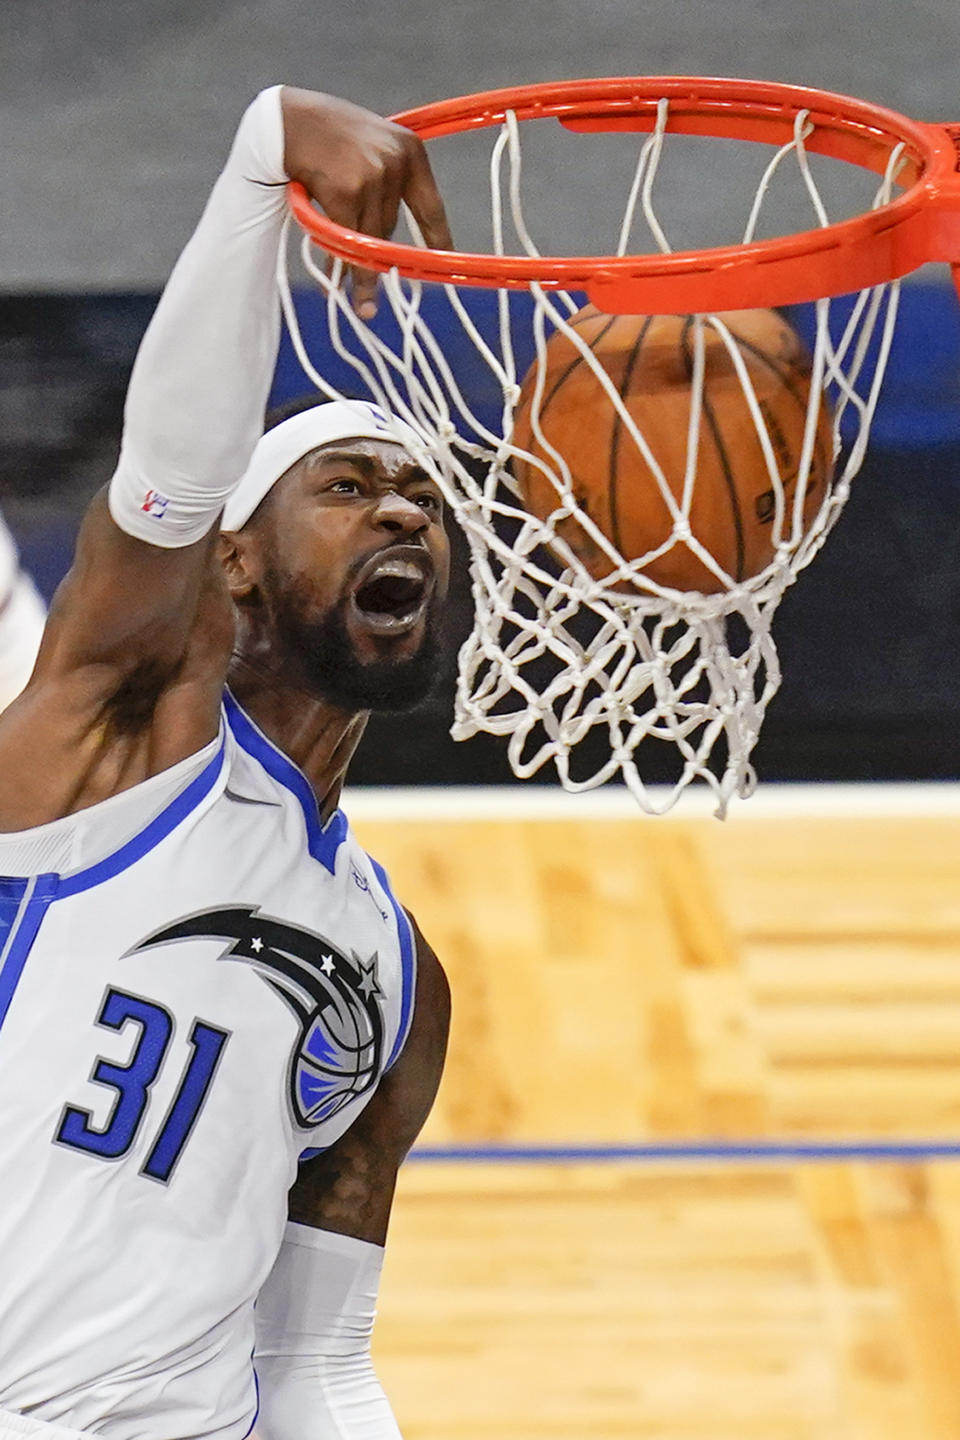 Orlando Magic guard Terrence Ross (31) slams the ball during the second half of an NBA basketball game against the Indiana Pacers, Friday, April 9, 2021, in Orlando, Fla. (AP Photo/John Raoux)